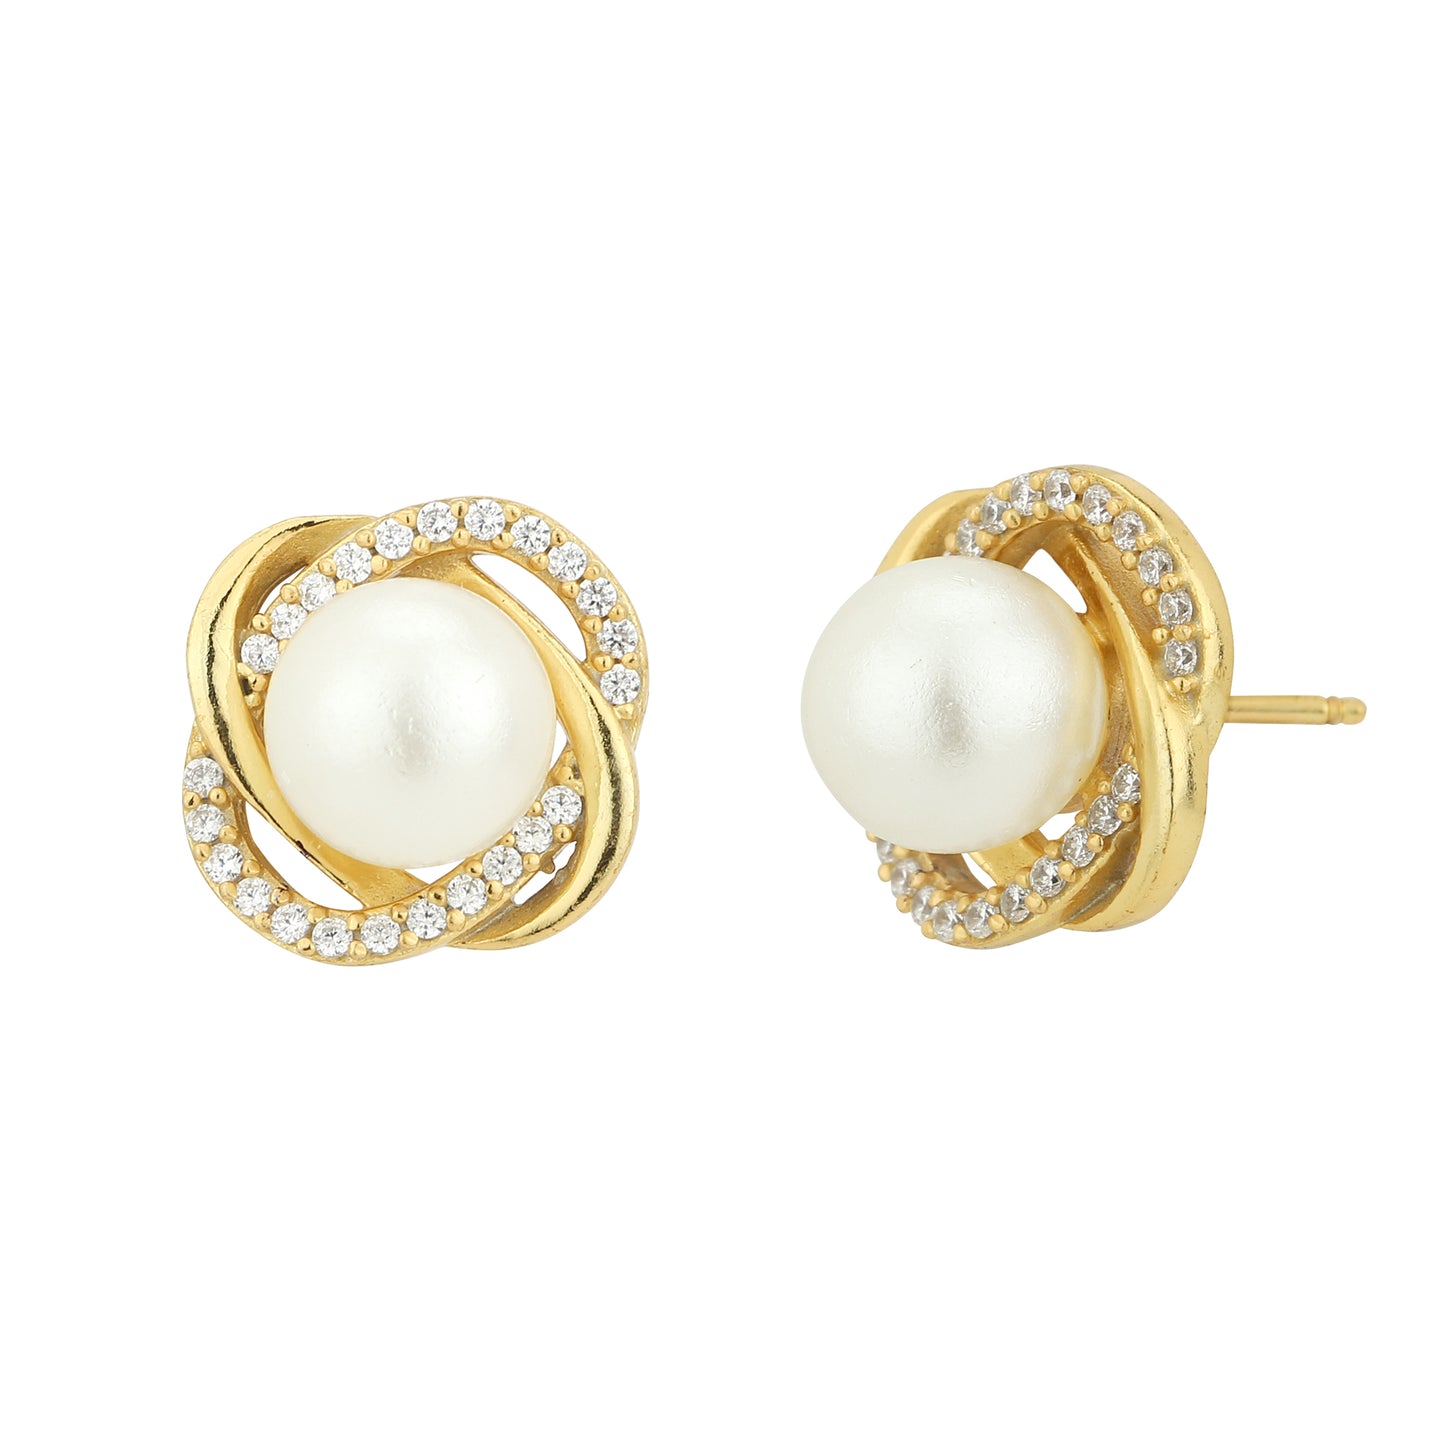 Carlton London White and Gold Beaded Contemporary Stone Stud Earrings